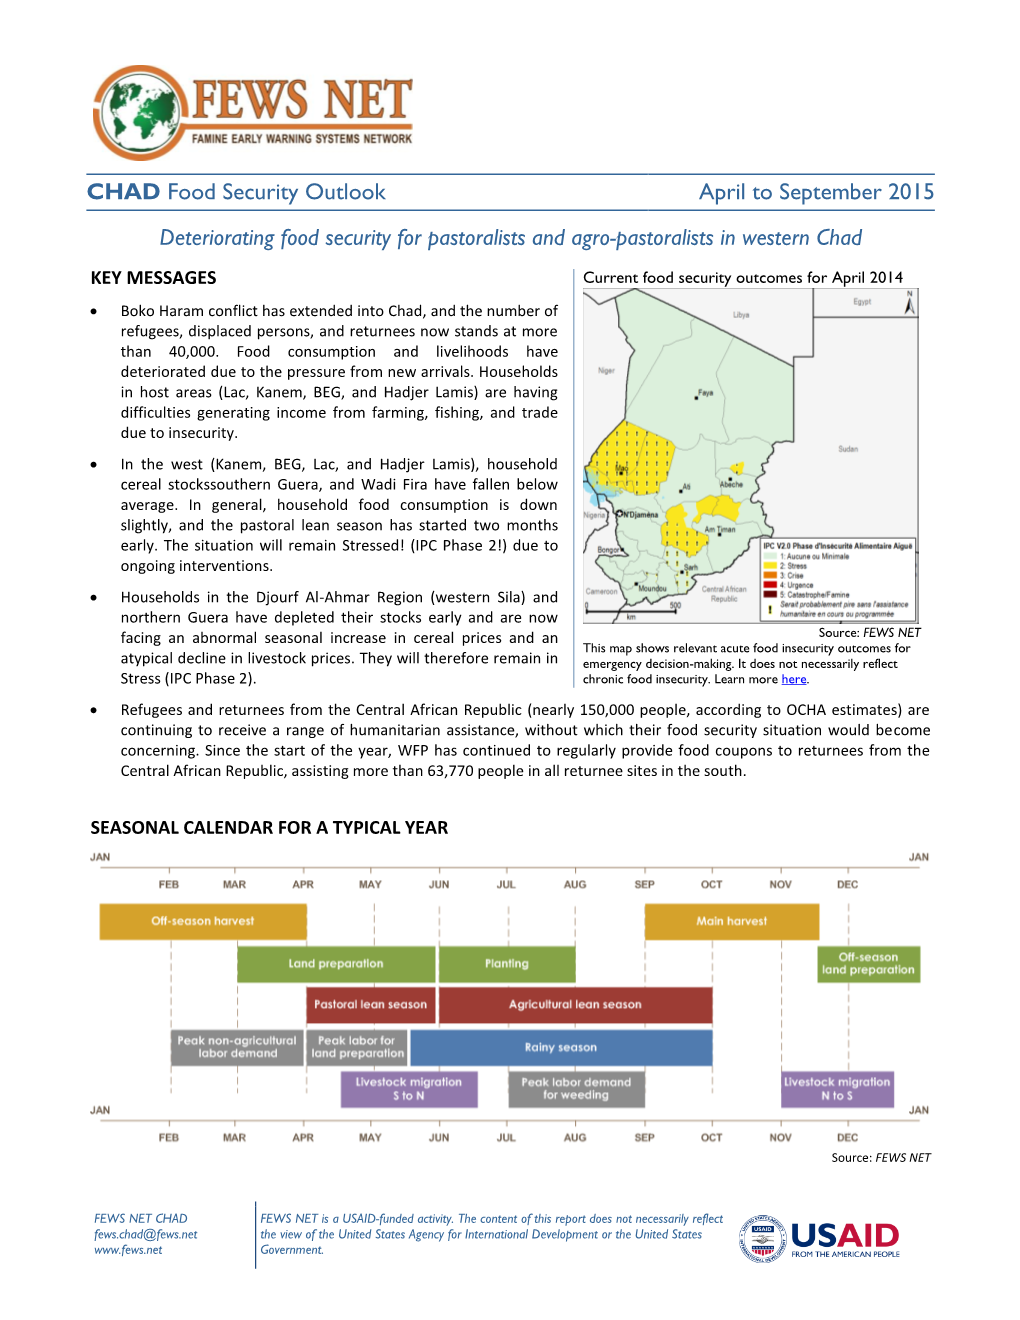 CHAD Food Security Outlook April to September 2015 Deteriorating Food